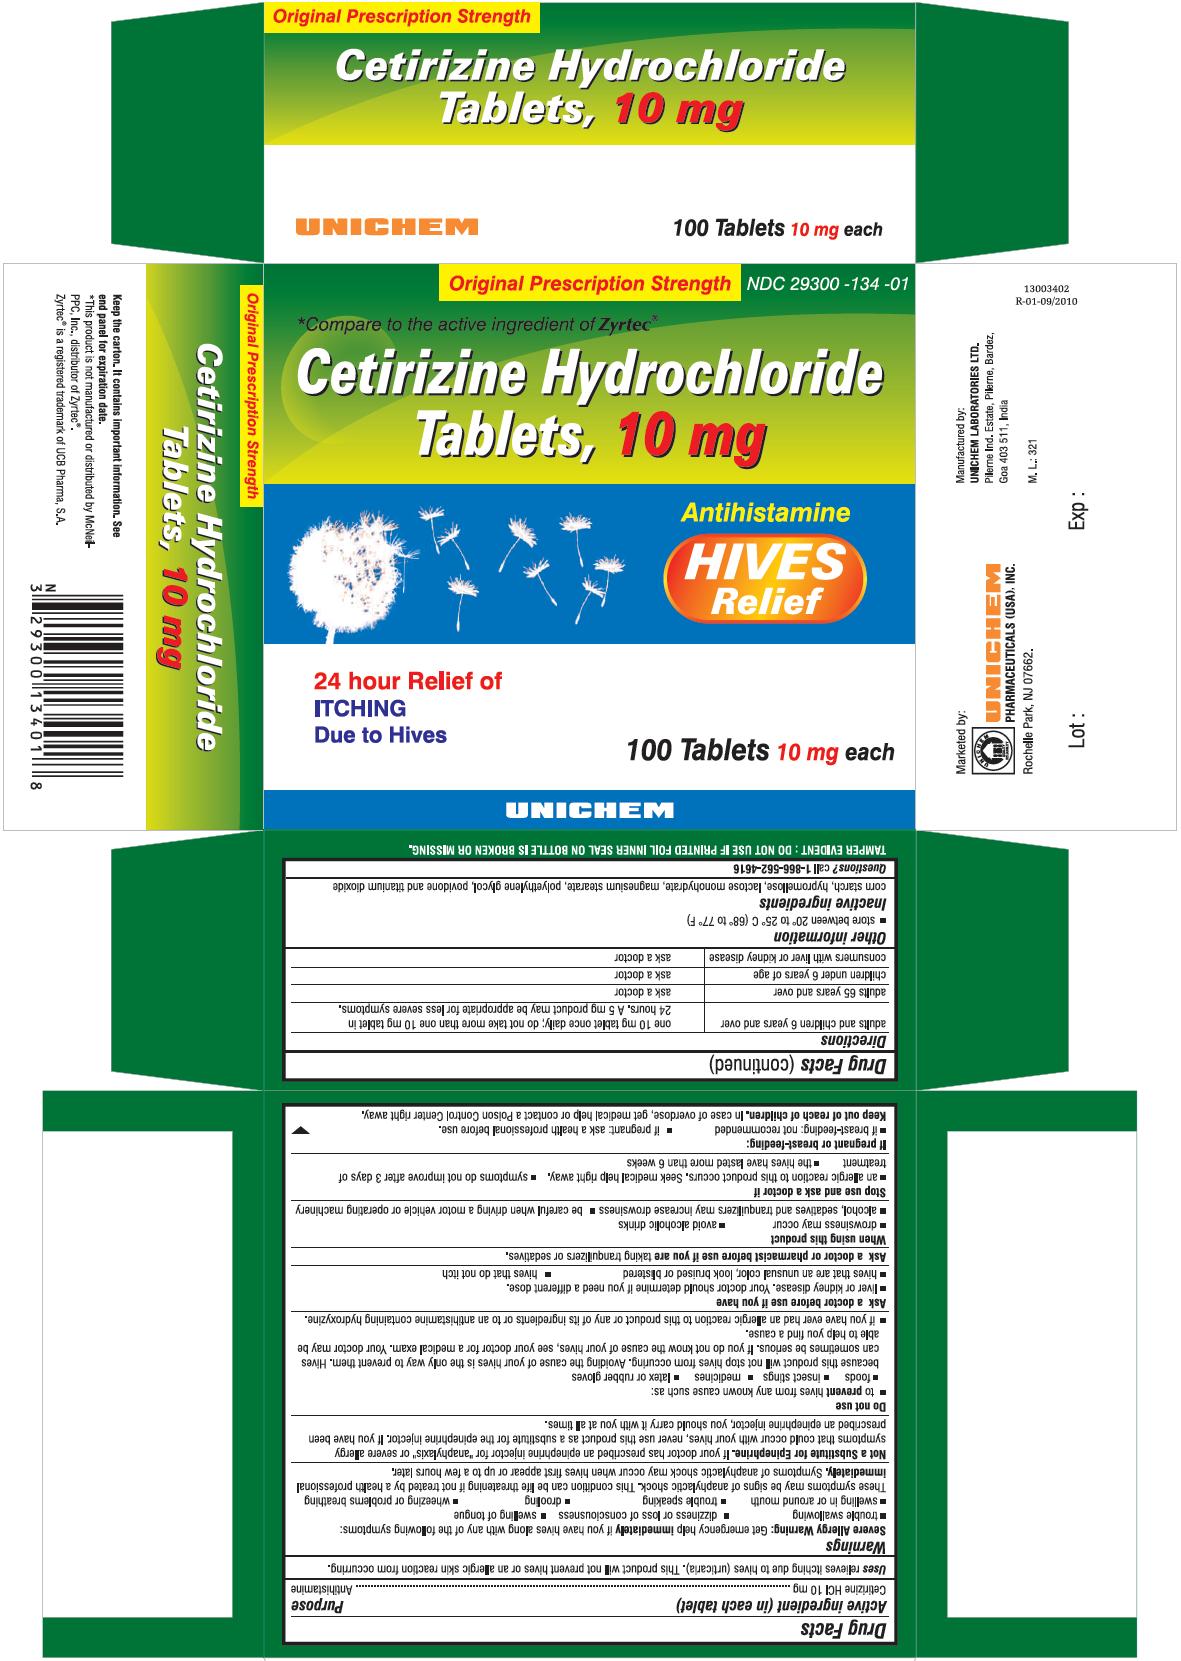 Cetirizine Hydrochloride Tablets 10 mg - Hives Relief